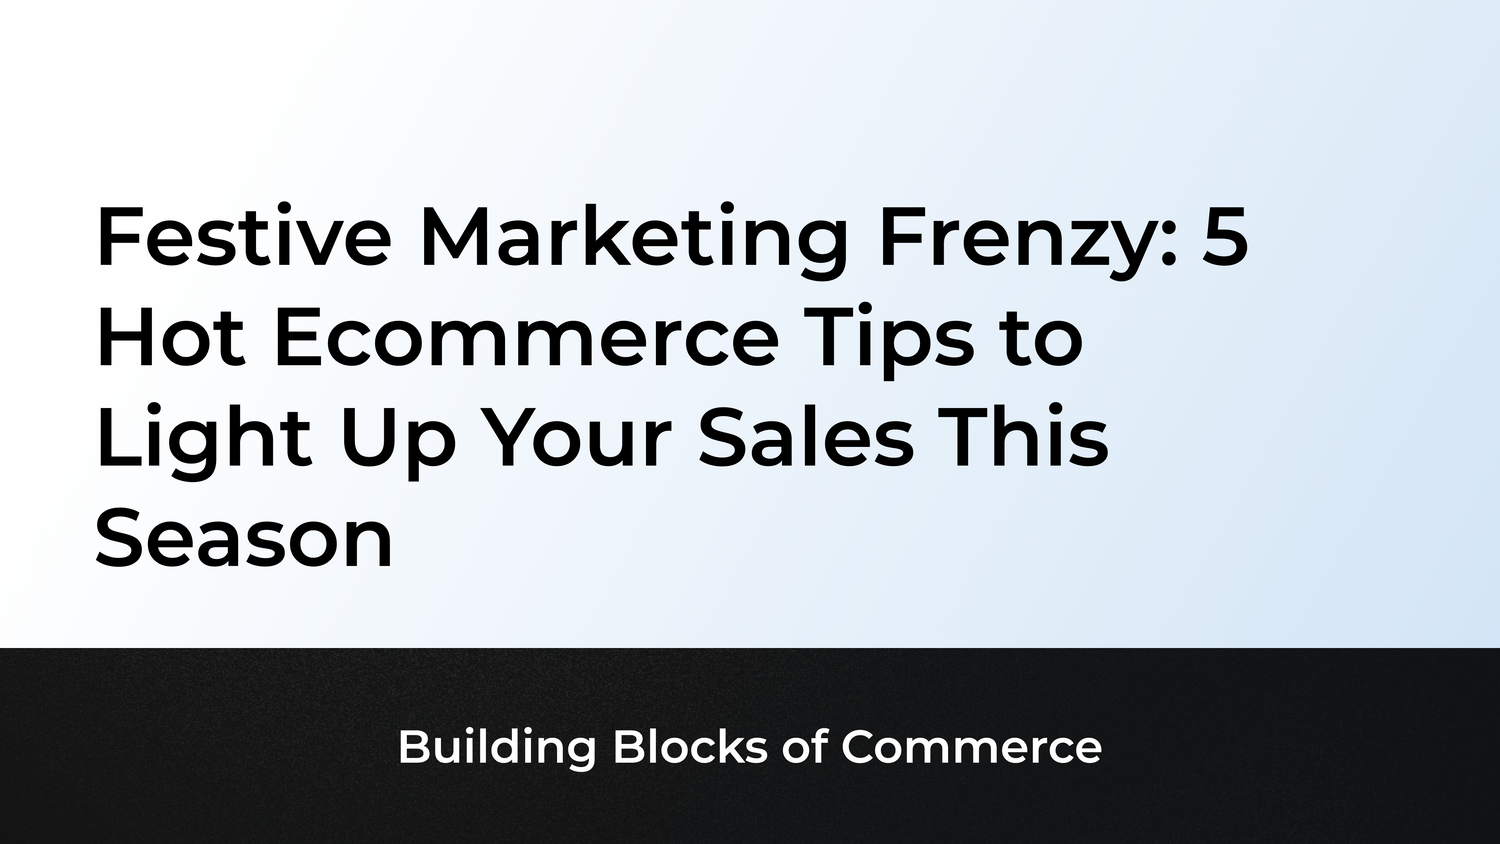 Festive Marketing Frenzy: 5 Hot Ecommerce Tips to Light Up Your Sales This Season